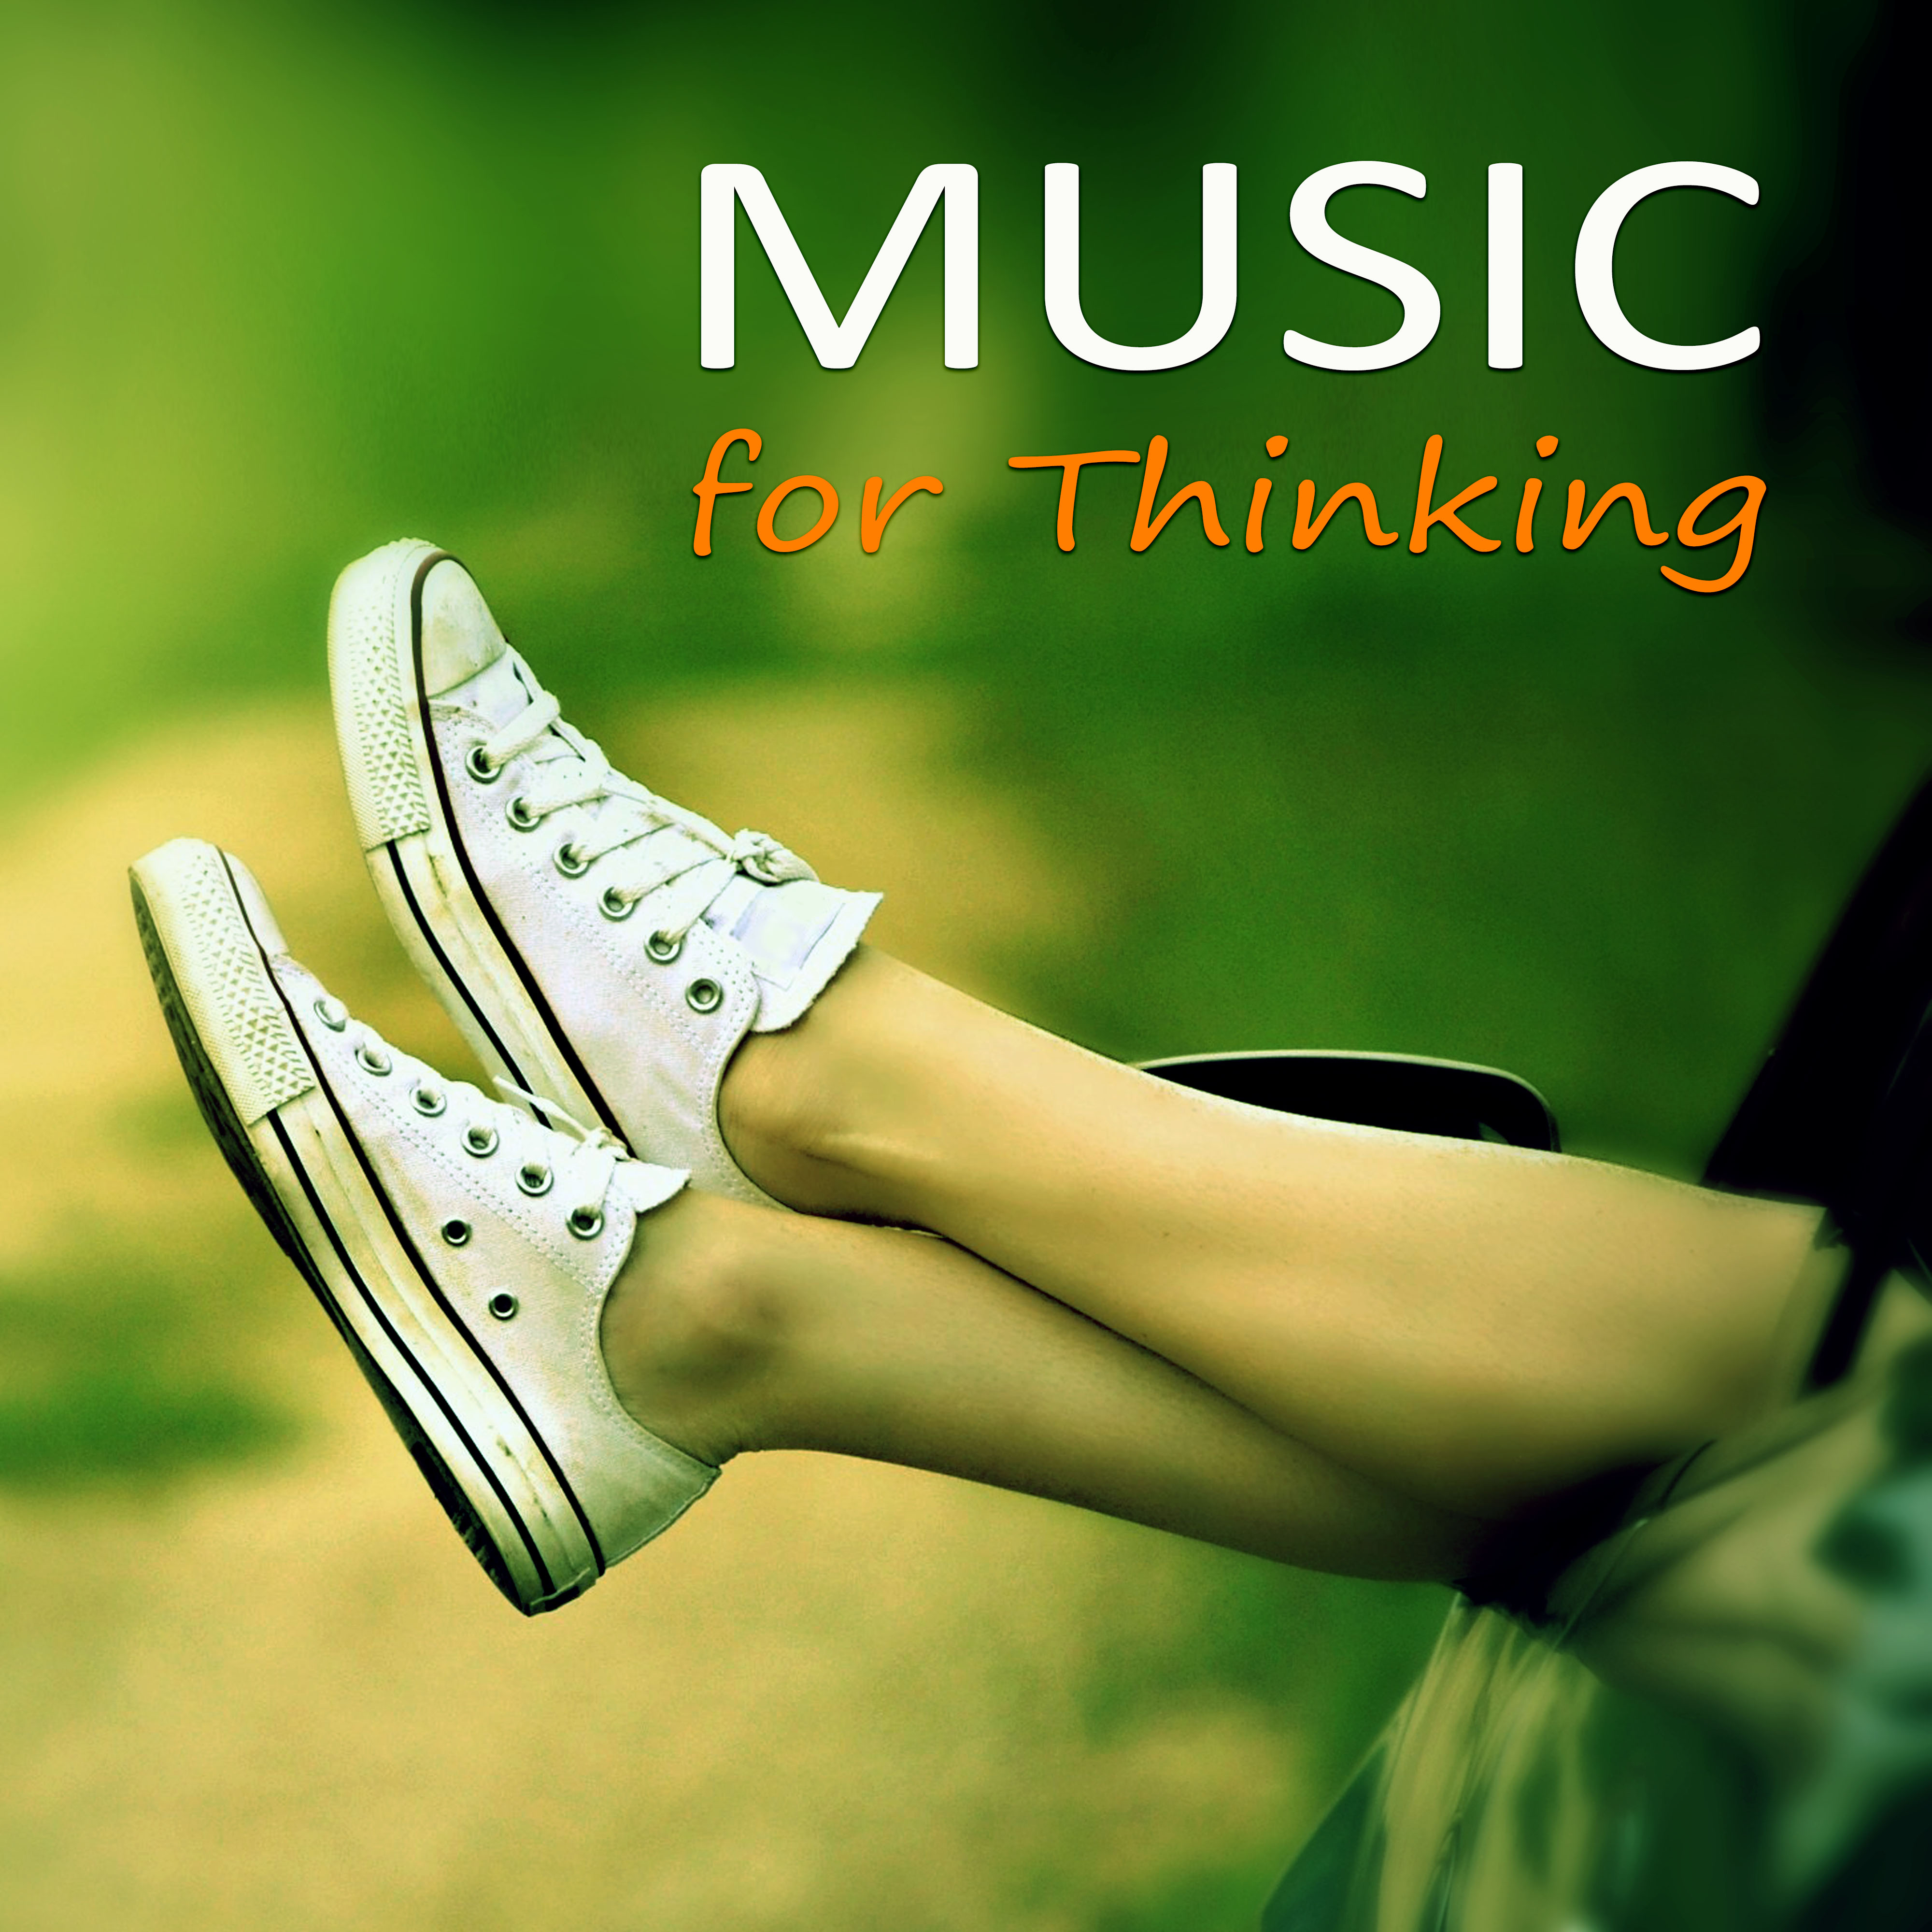 Music for Thinking  Deep Sounds Learning, Concentration Music, Study Music, Brain Power,  Soft Relaxing Music for Reading, New Age